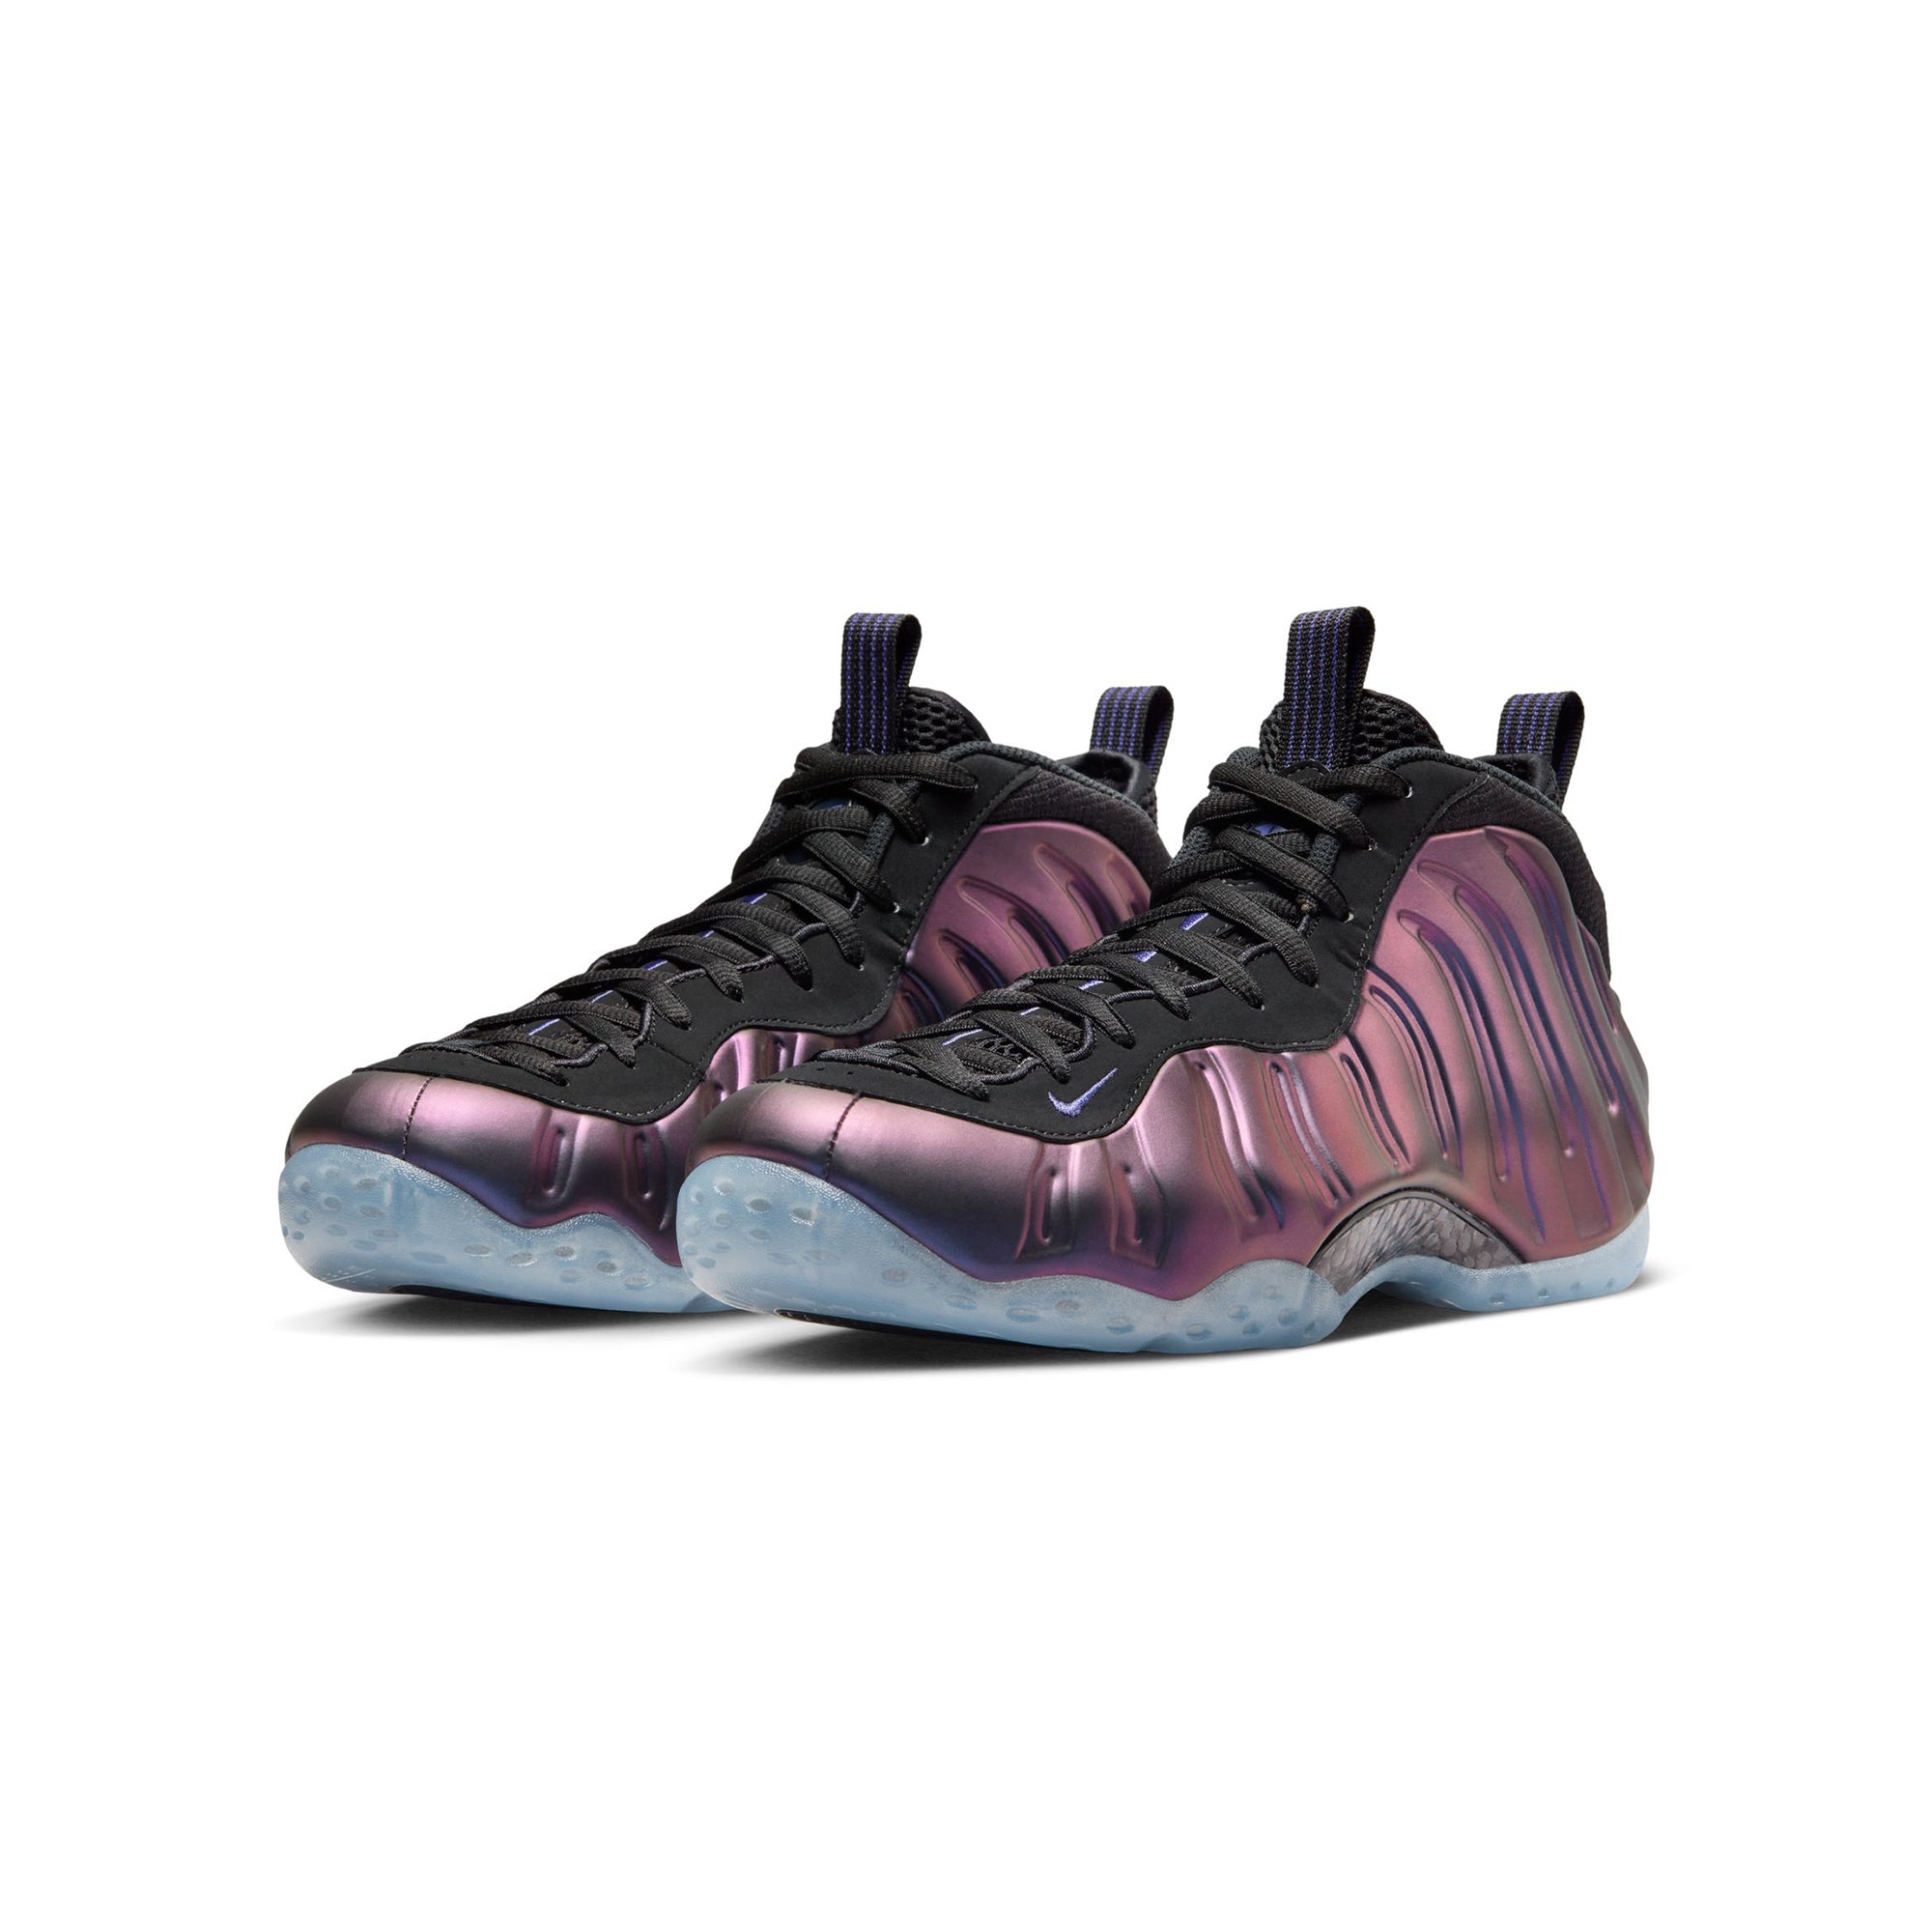 Nike Mens Air Foamposite One Shoes